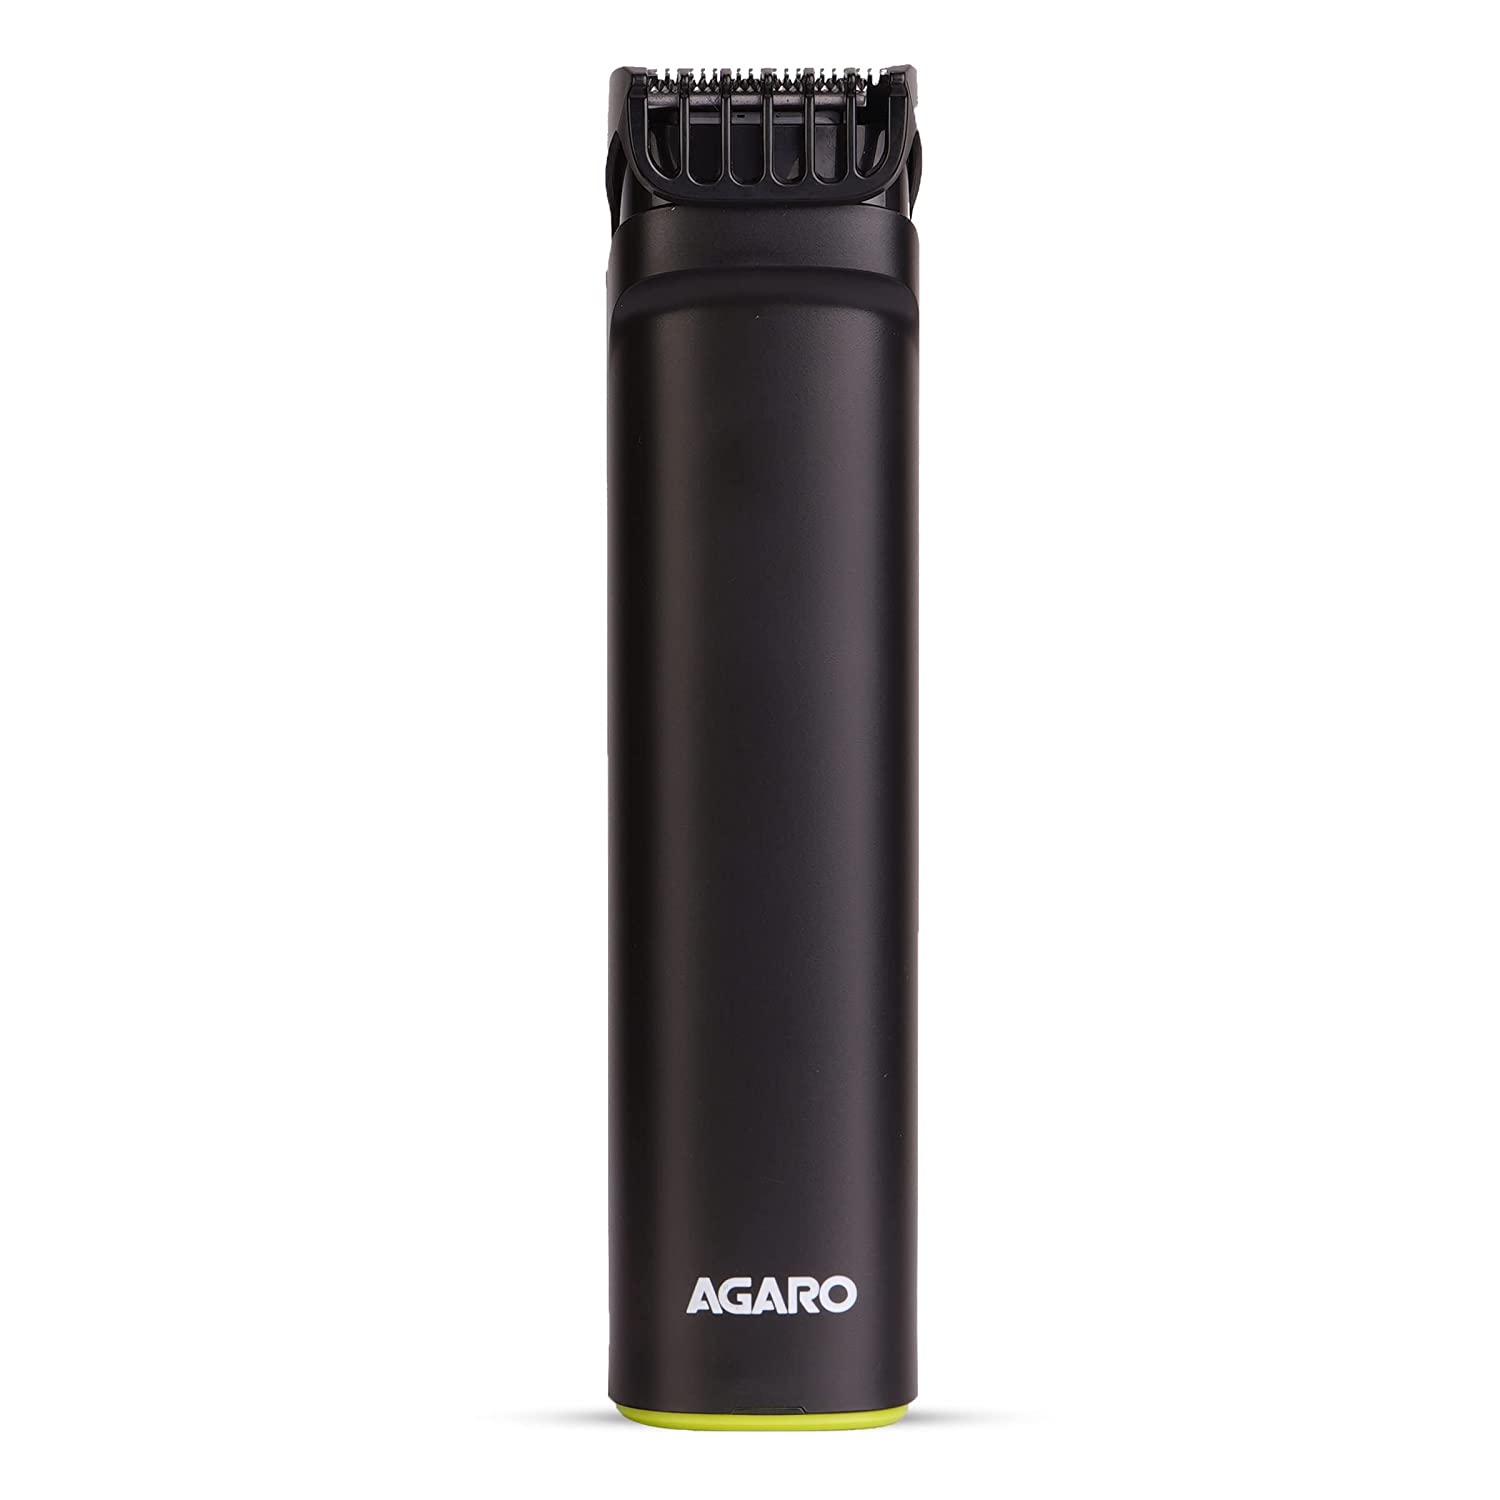 Agaro Mt 8001 Beard Trimmer For Men, 60Min Run Time, Usb Charging, Fast Charge, 20 Length Setting, Rechargeable Battery, Black